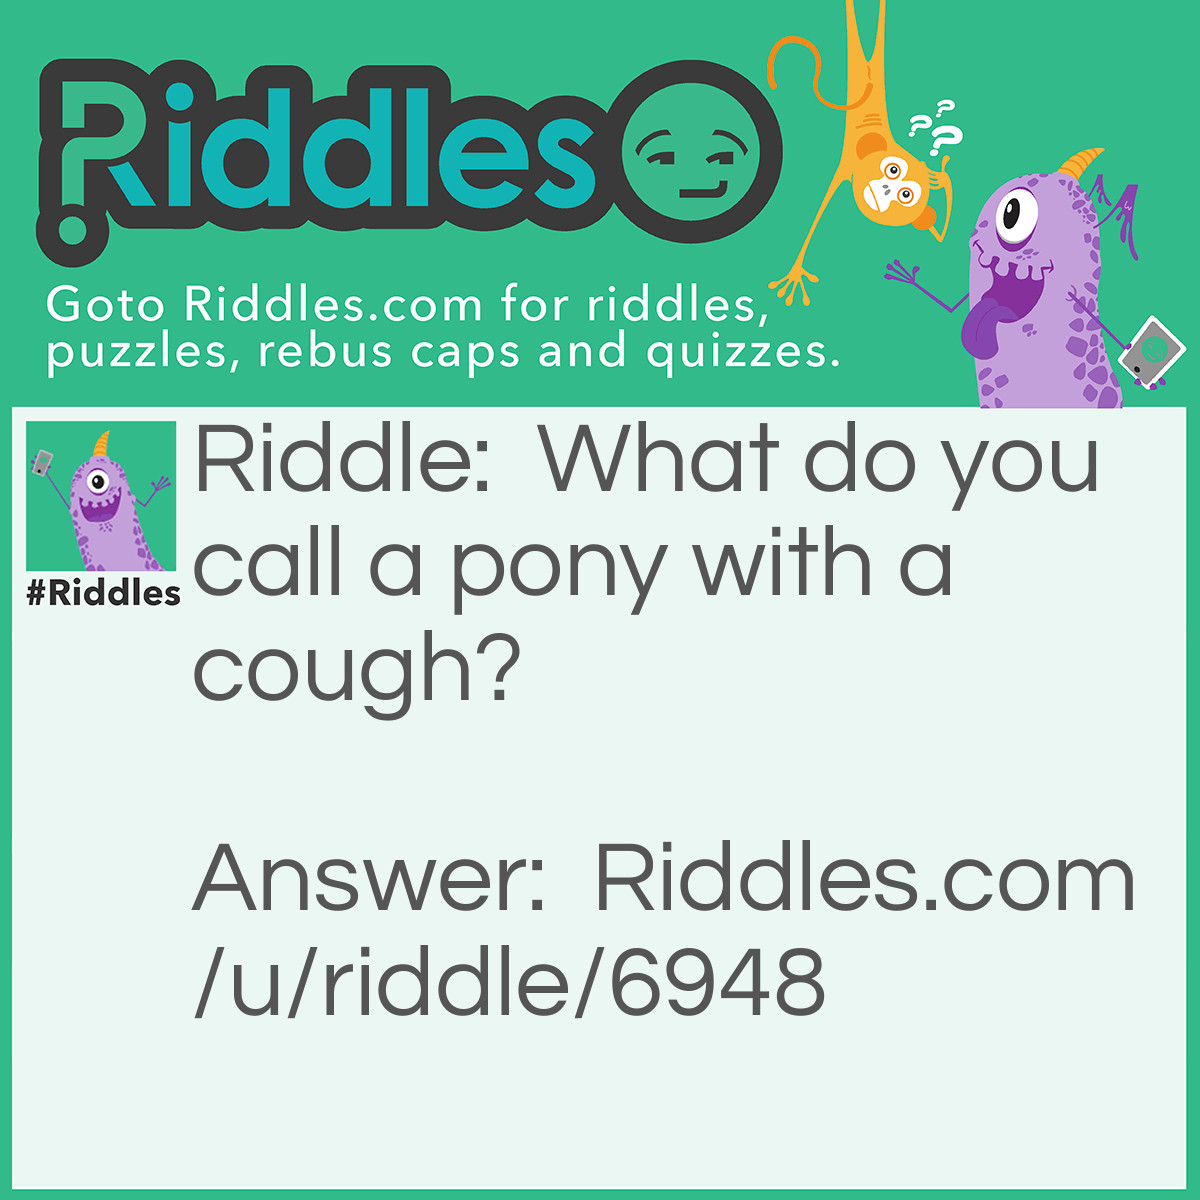 Riddle: What do you call a pony with a cough? Answer: A little "horse"